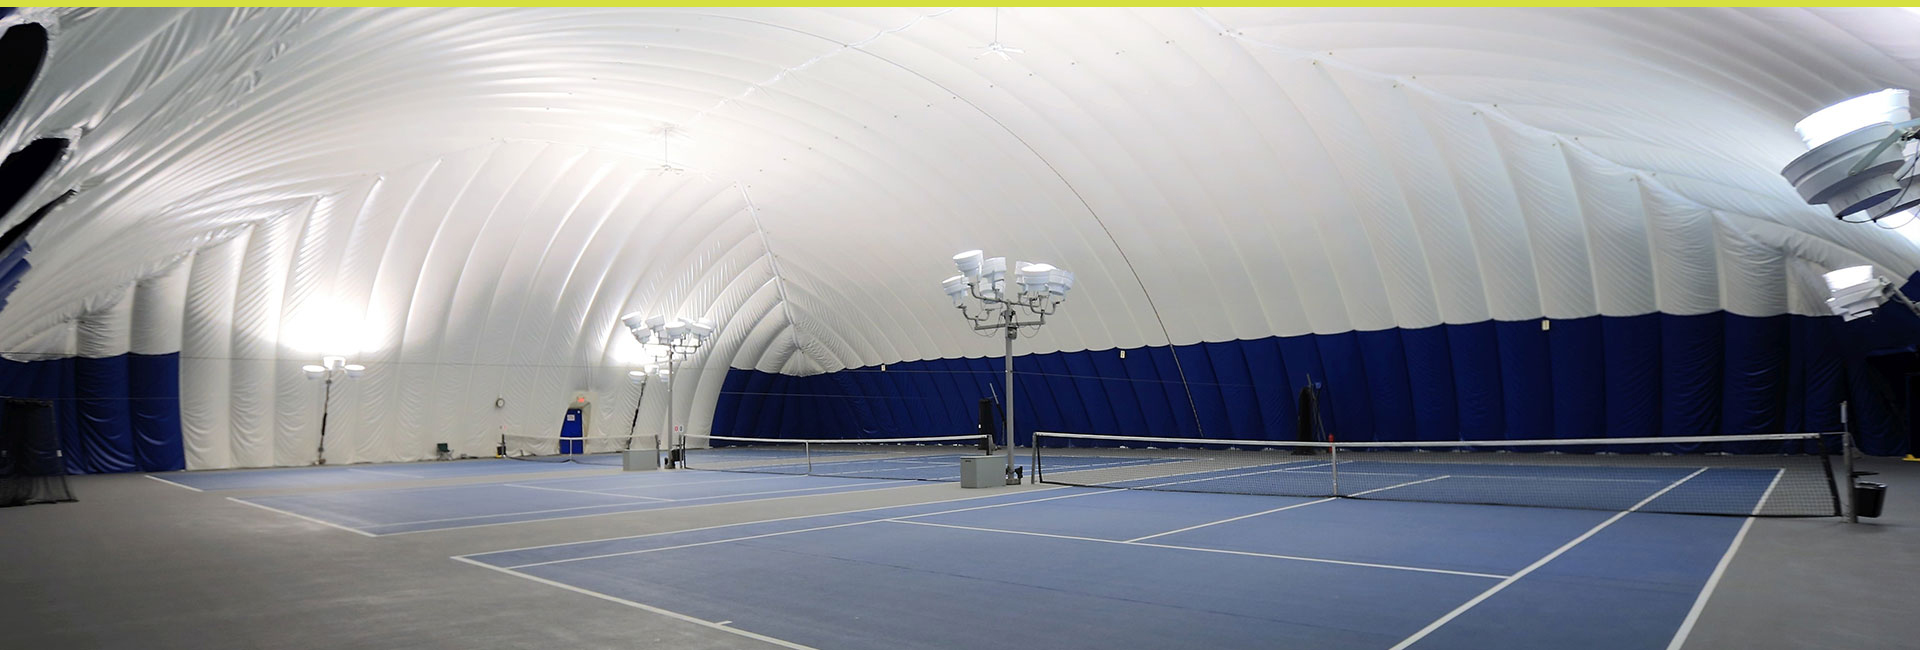 Olympic Indoor Tennis Courts